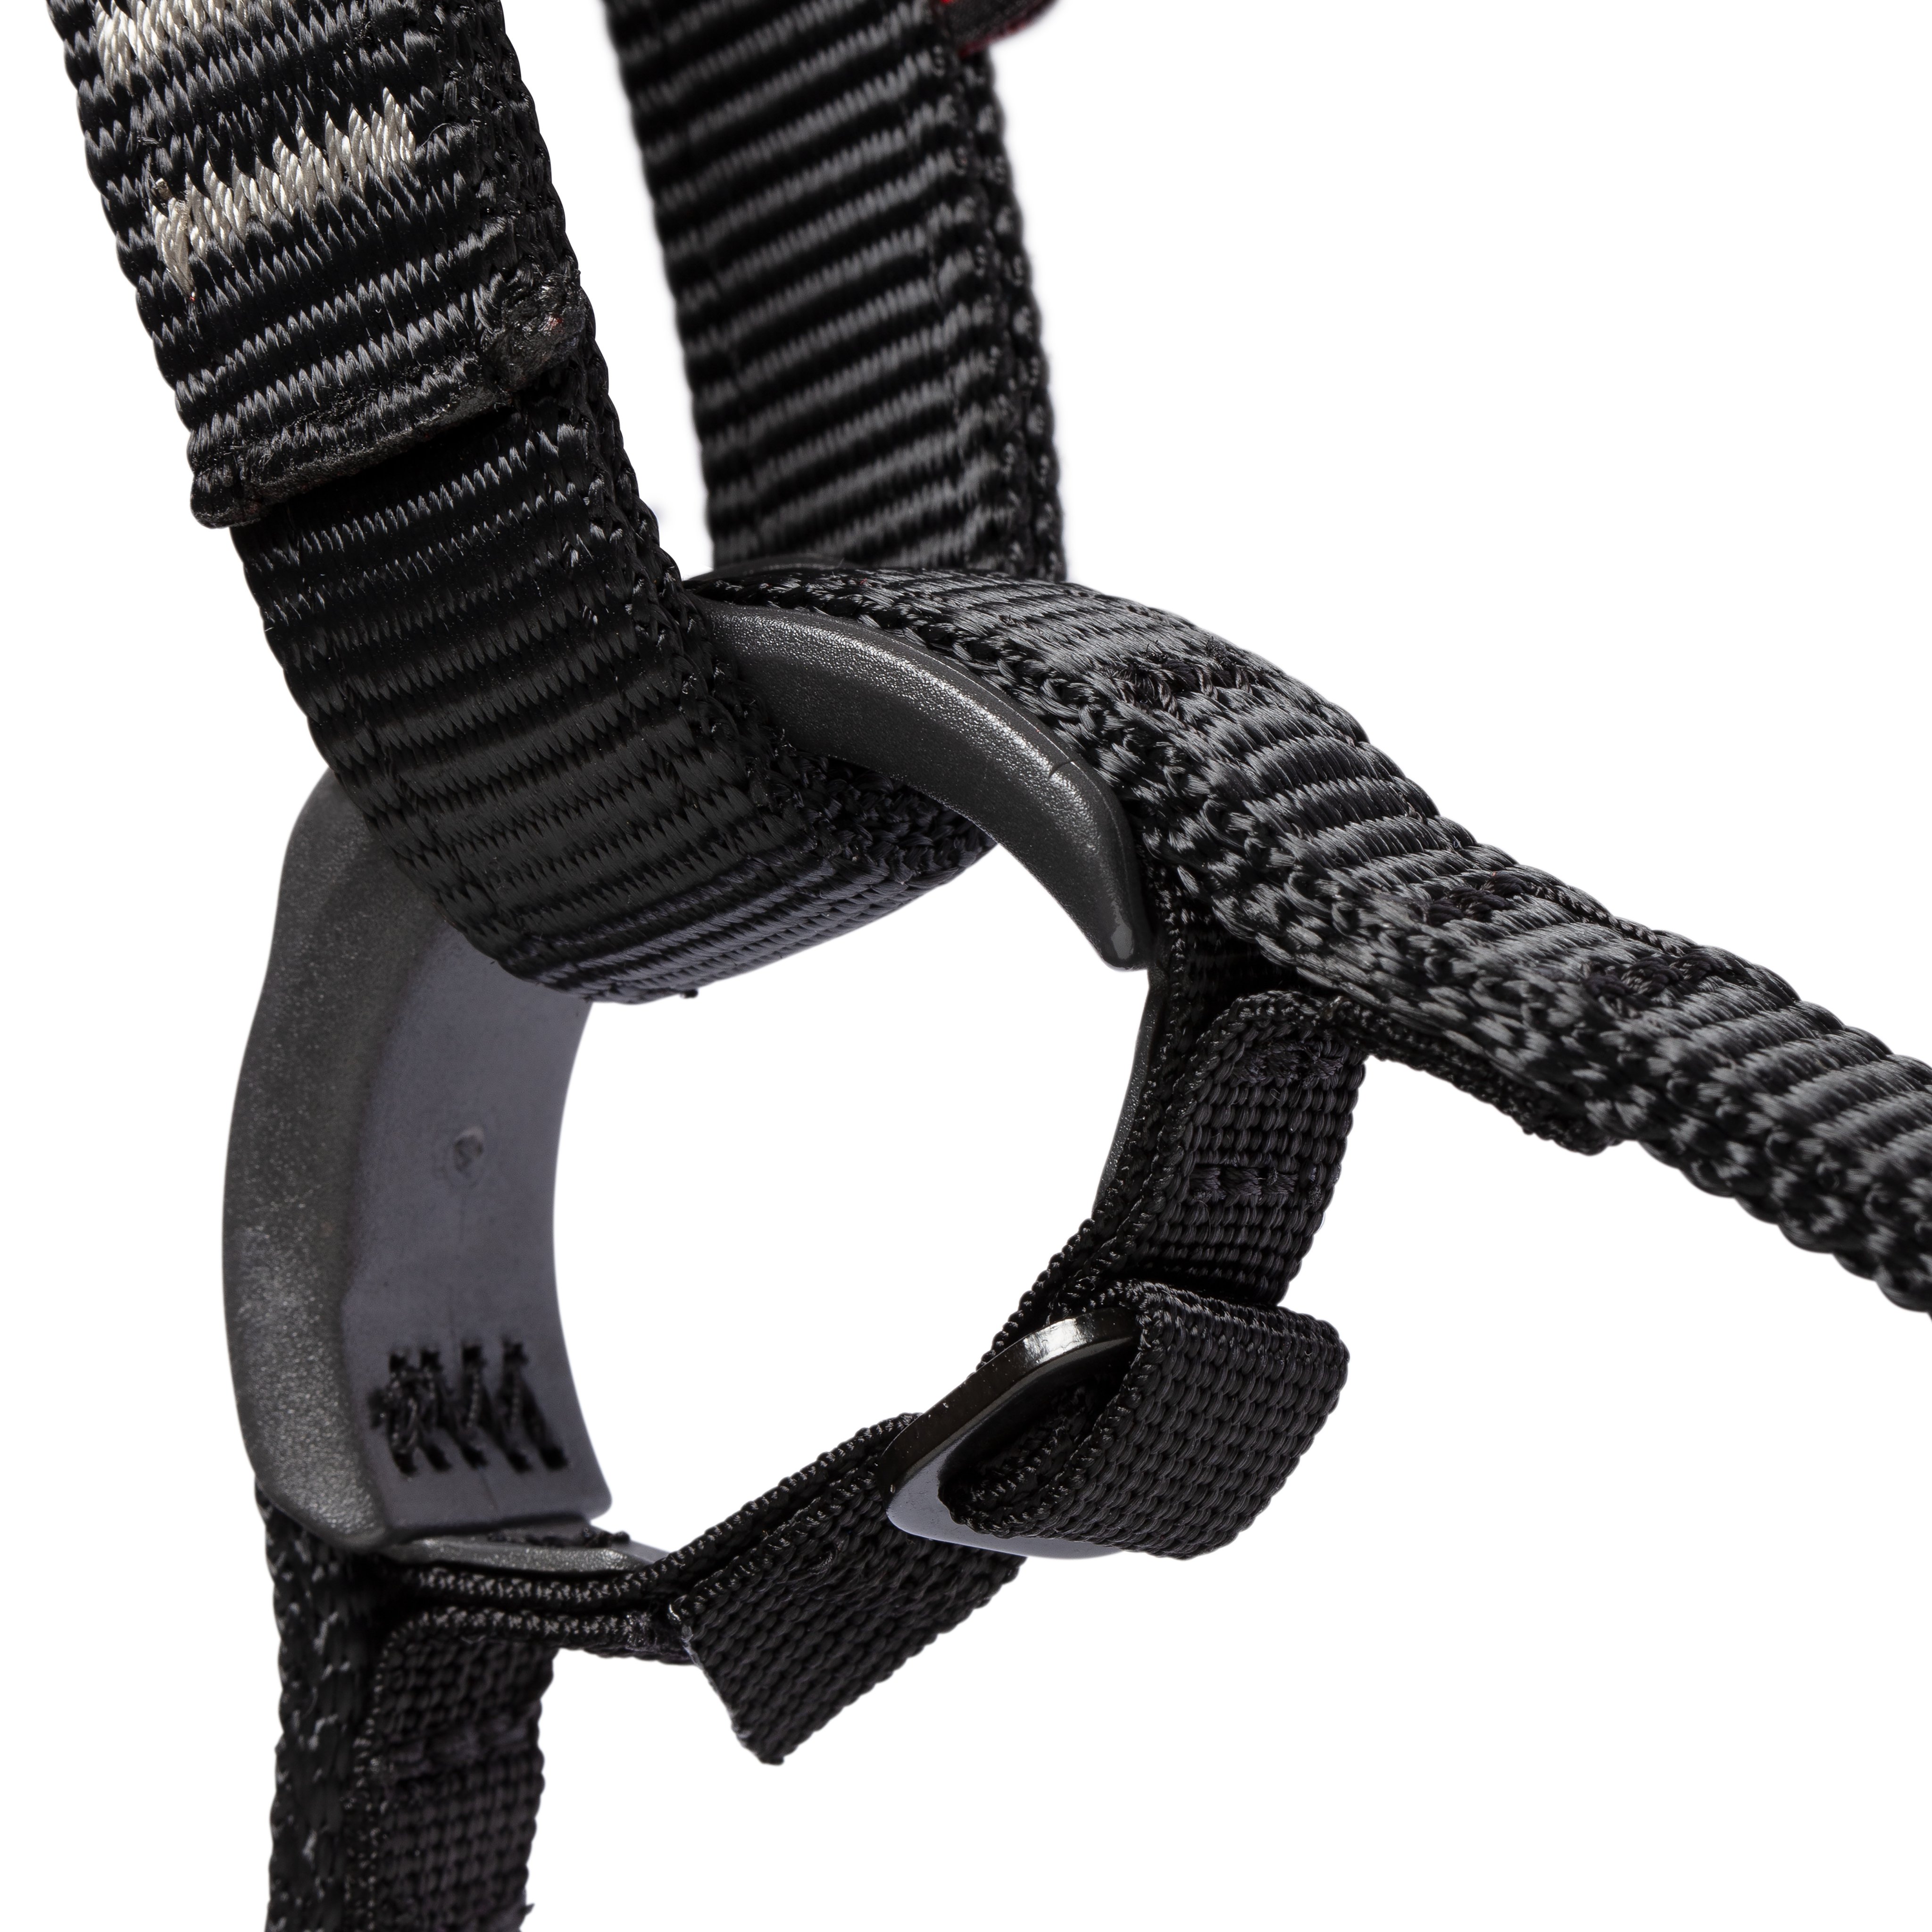 Ophir 4 Slide Climbing Package product image